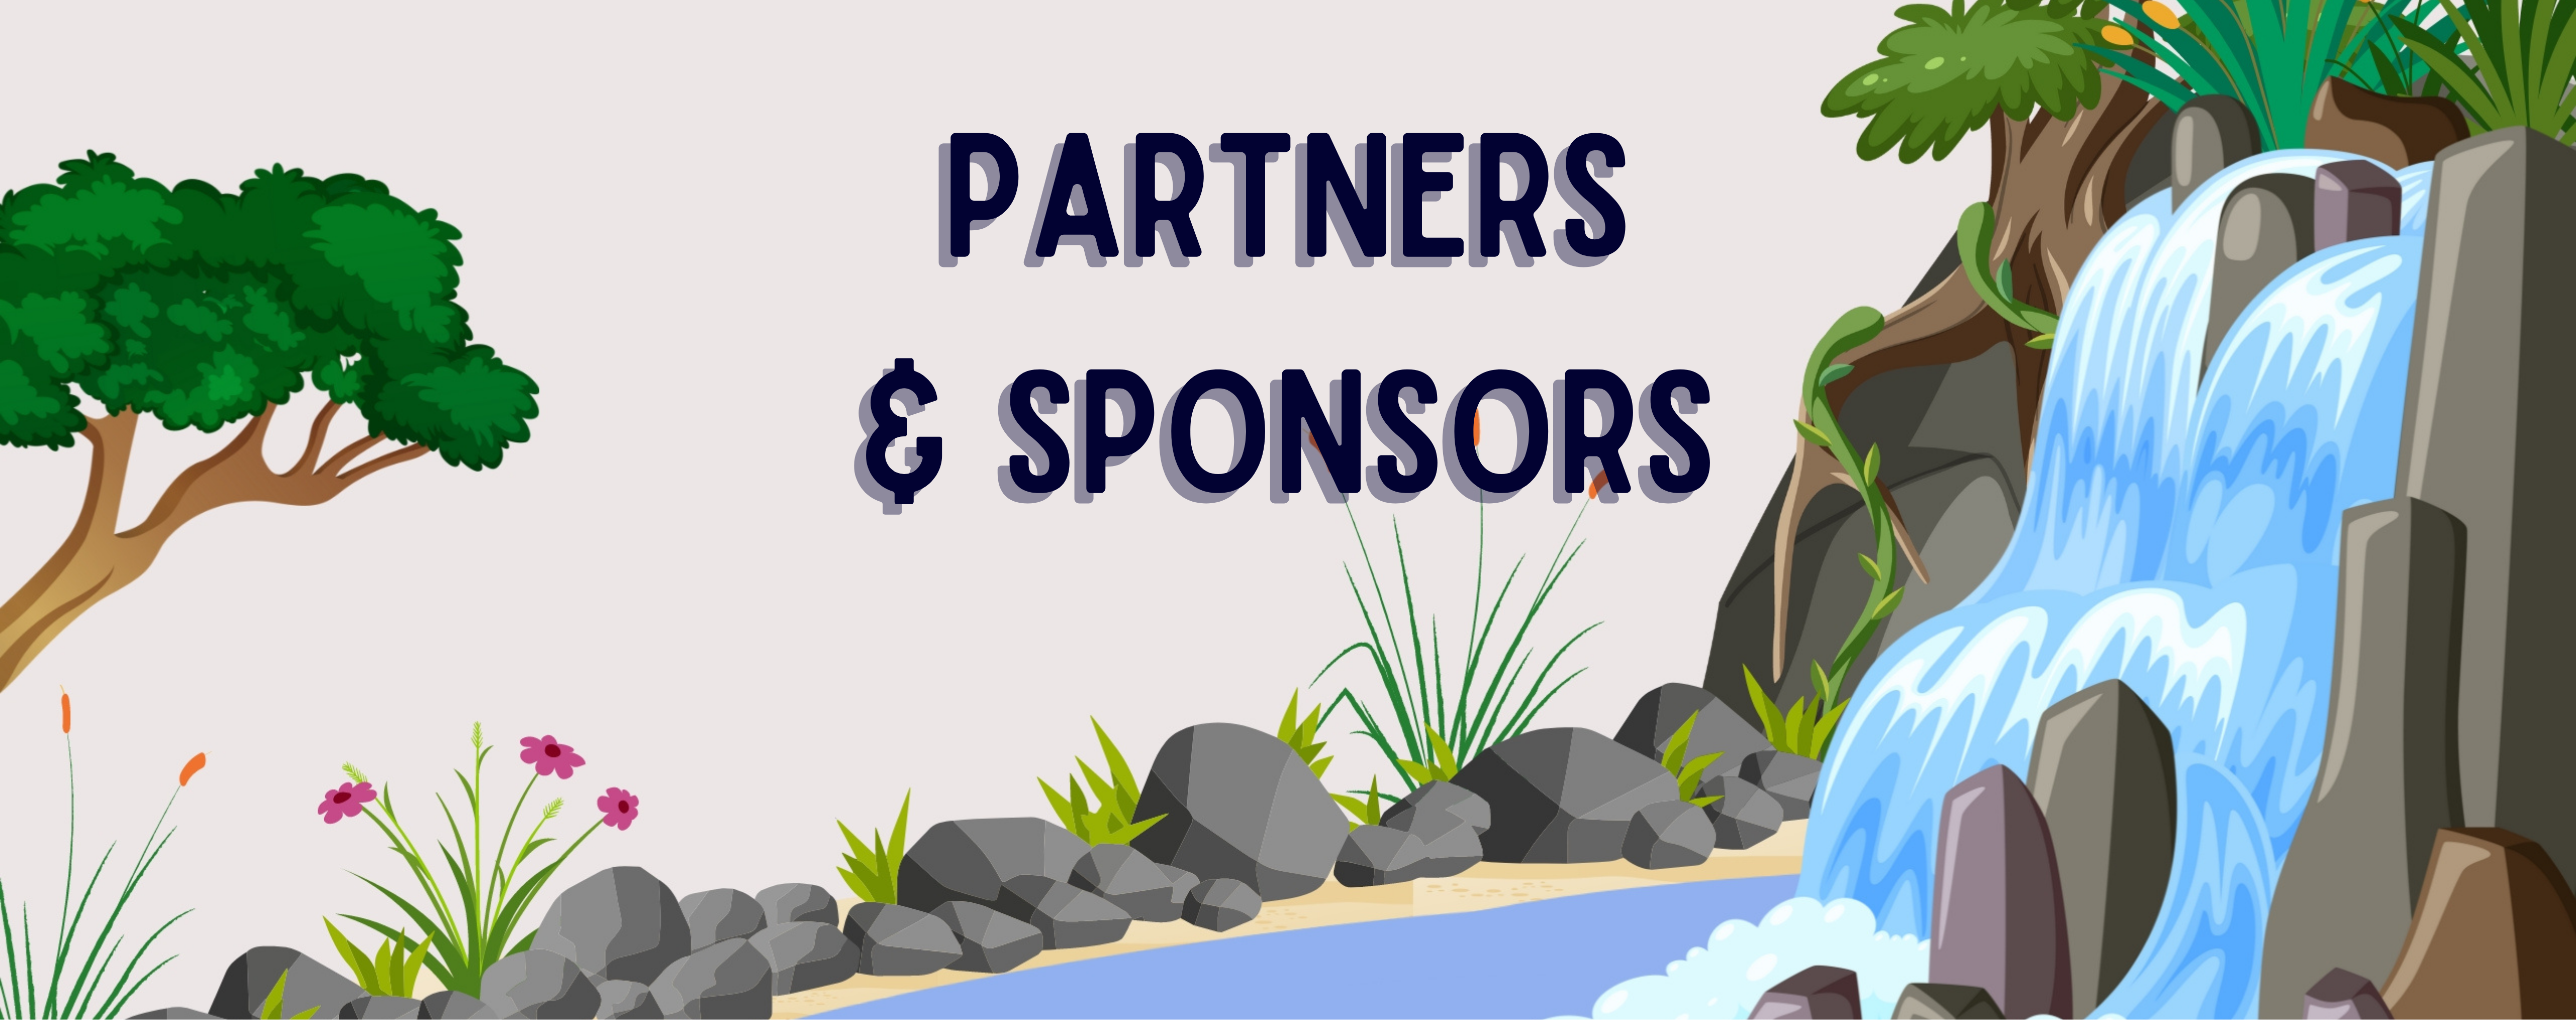 Background image is an illustration of a waterfall with lots of rocks and plants on the banks of the water. The words overlaying the image read: Partners & Sponsors.